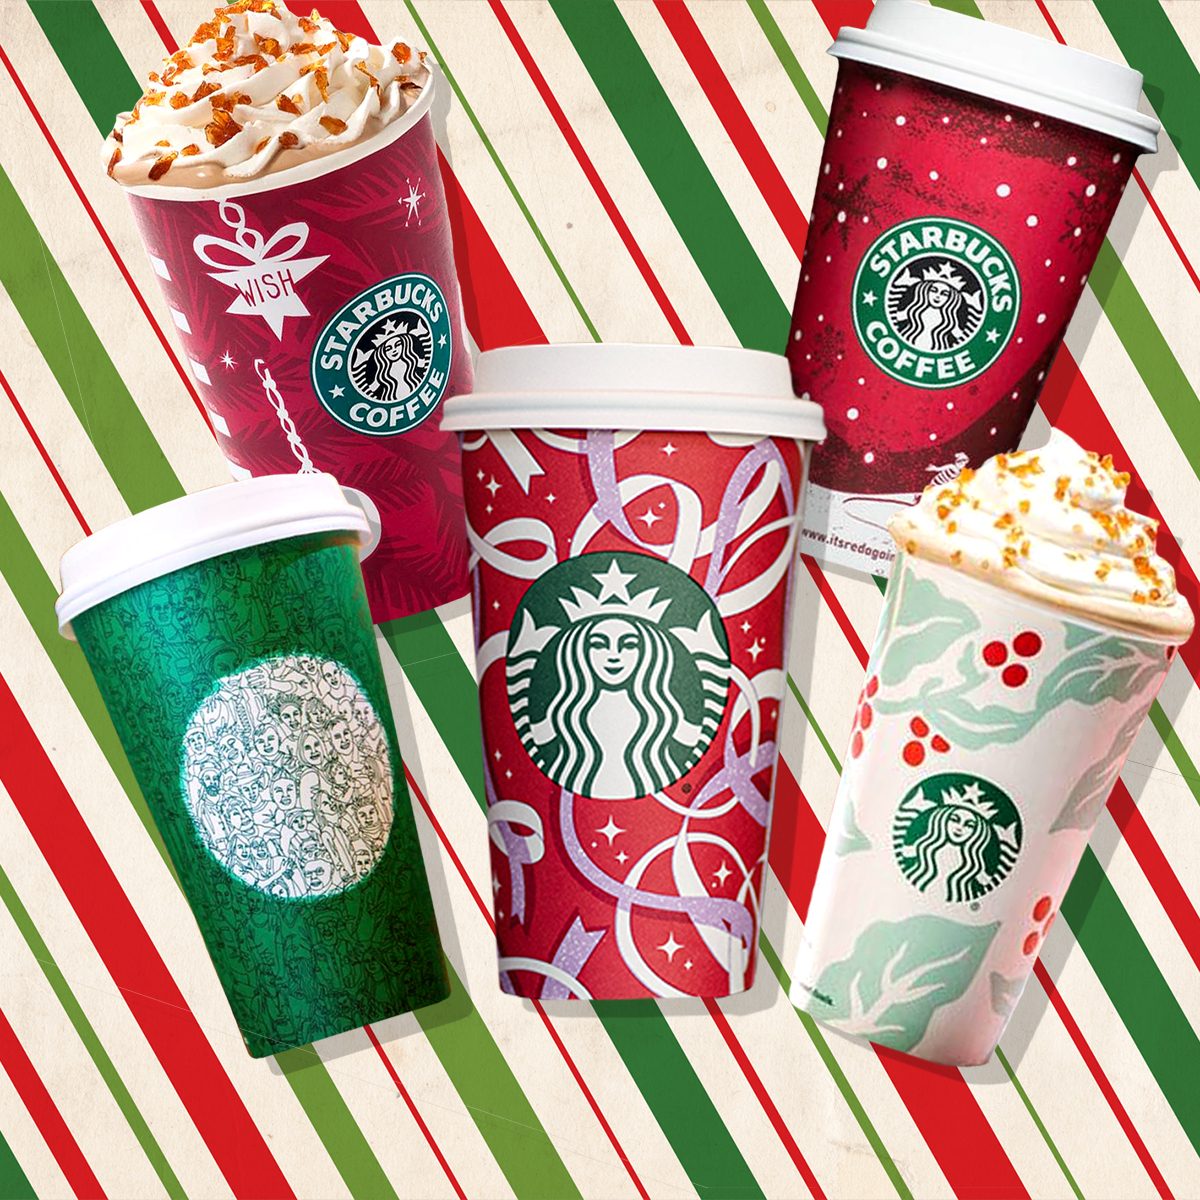 https://akns-images.eonline.com/eol_images/Entire_Site/2021103/rs_1200x1200-211103095413-1200-Starbucks-red-cups.jpg?fit=around%7C600:600&output-quality=90&crop=600:600;center,top